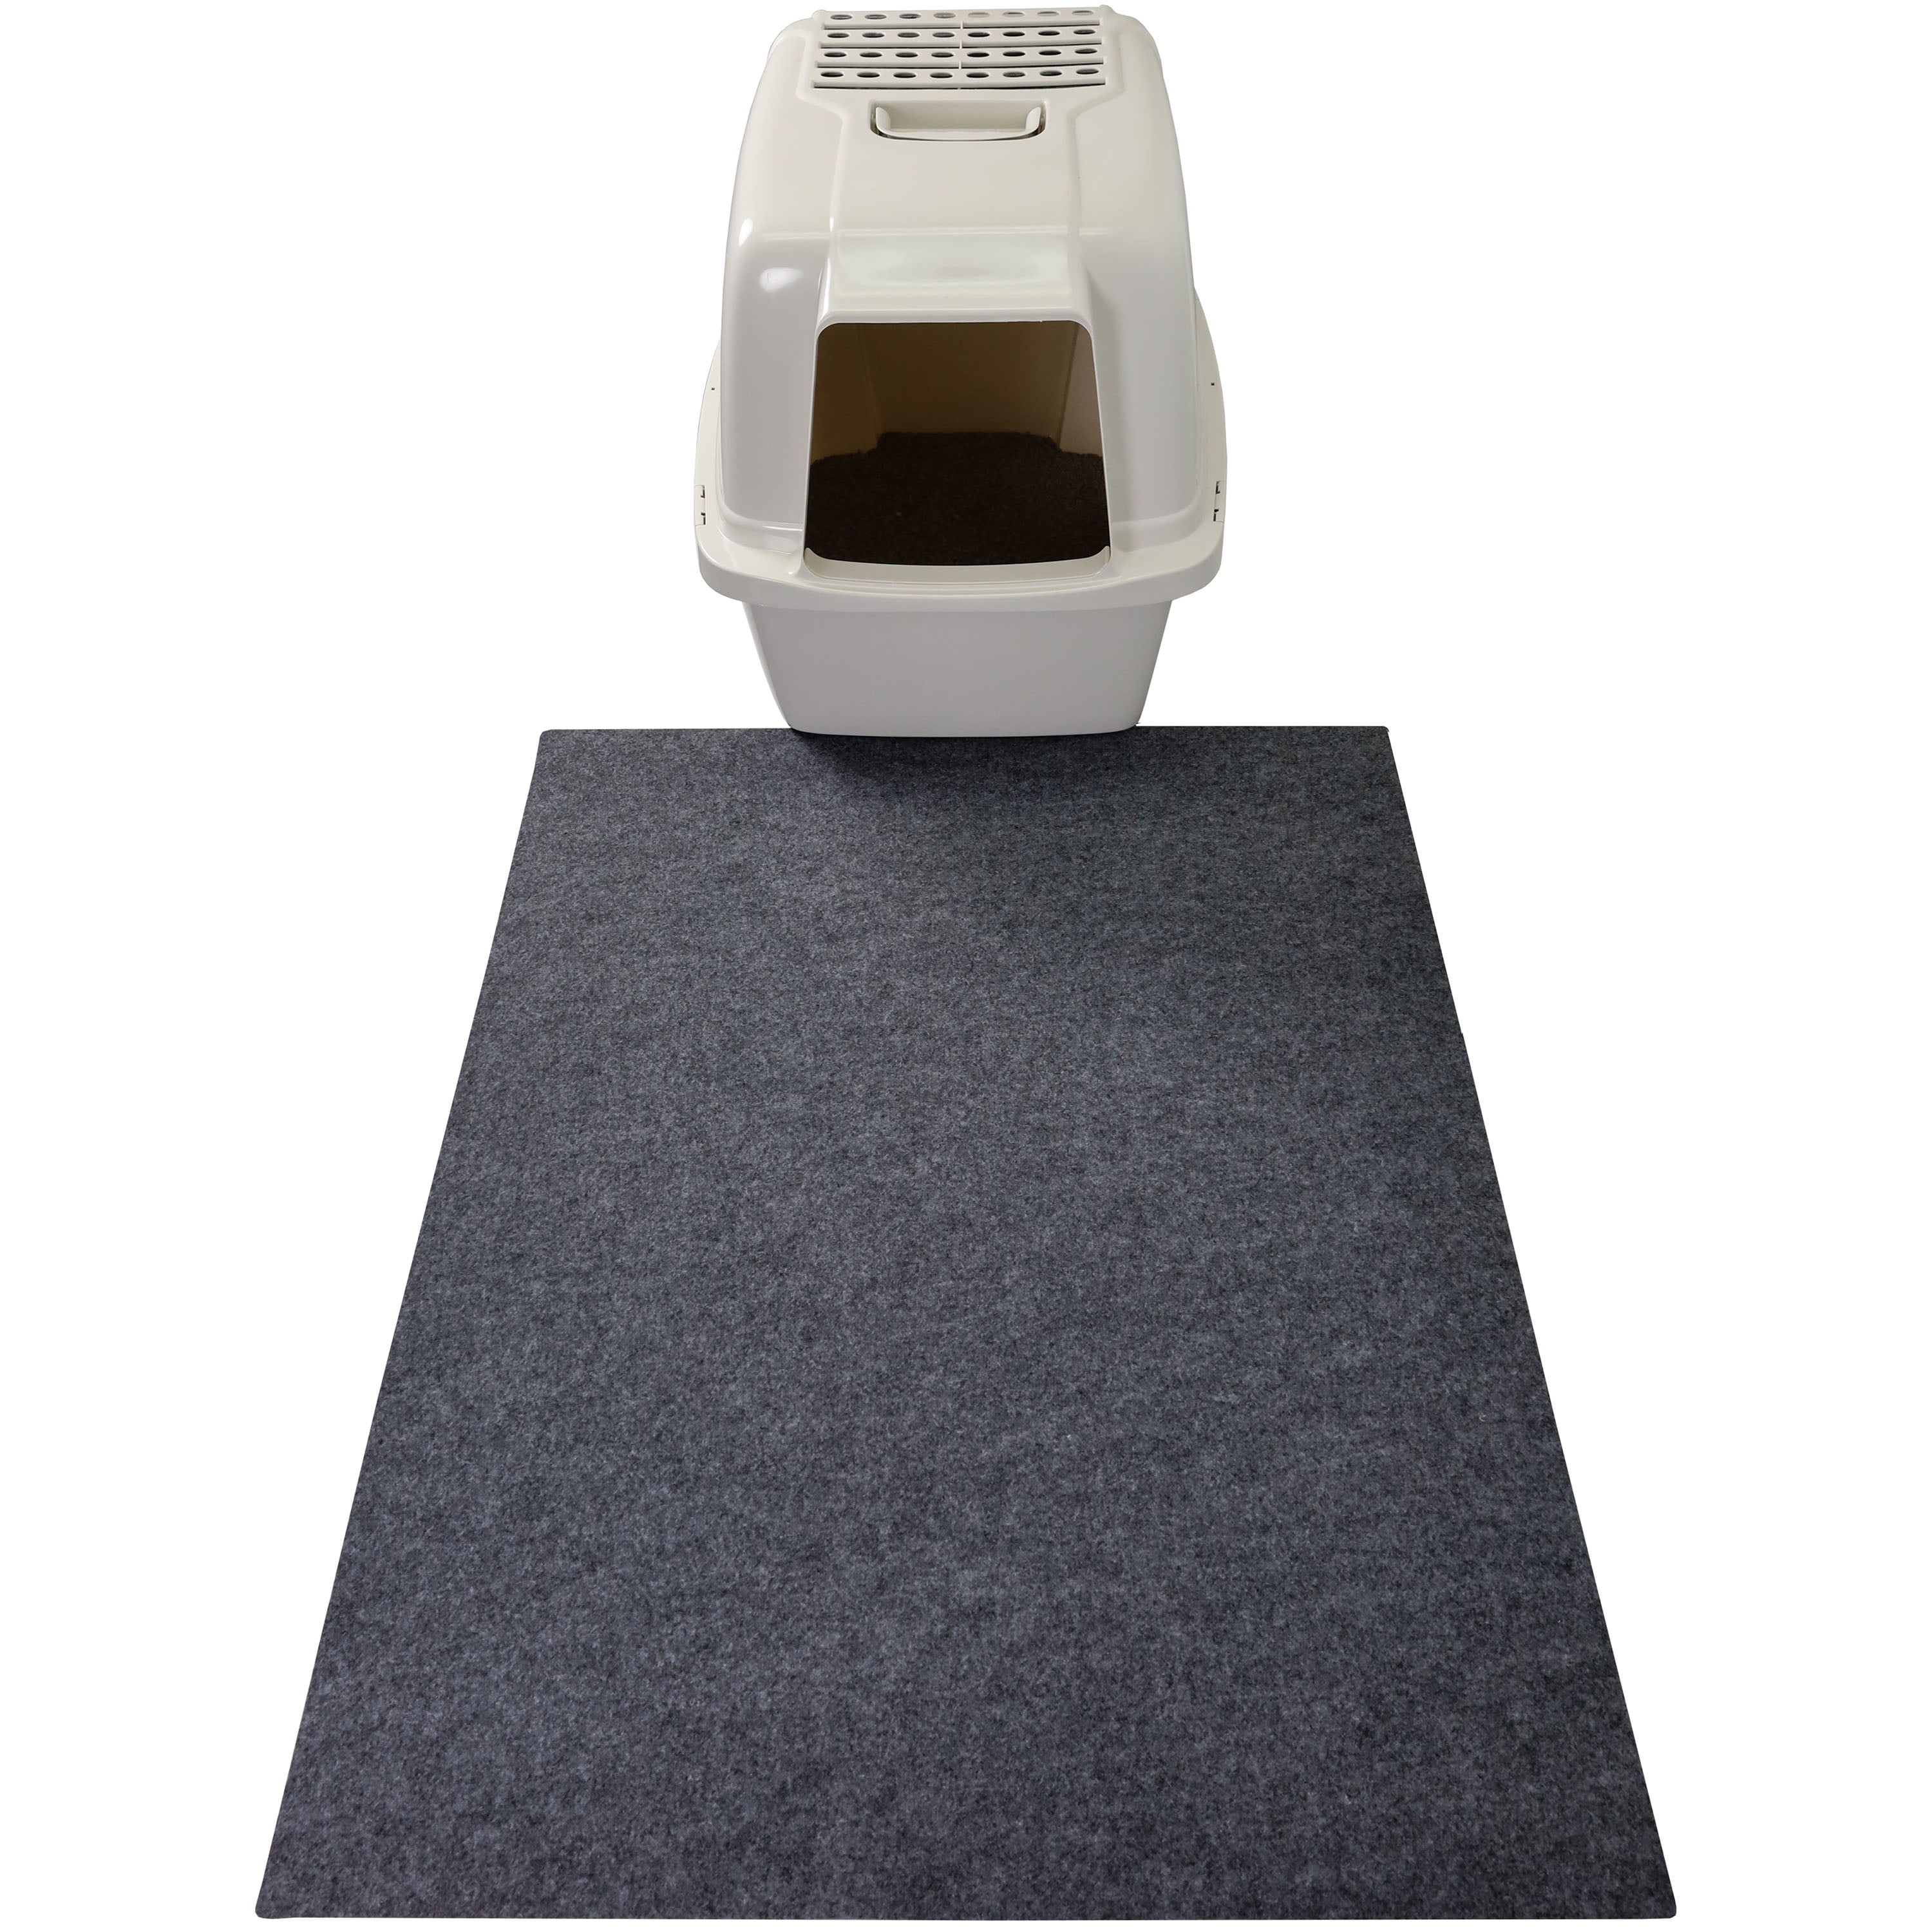 Petmate Litter Catcher Mat Extra Large, Grey, Model:22990 47x32x0.25 Inch  (Pack of 1)